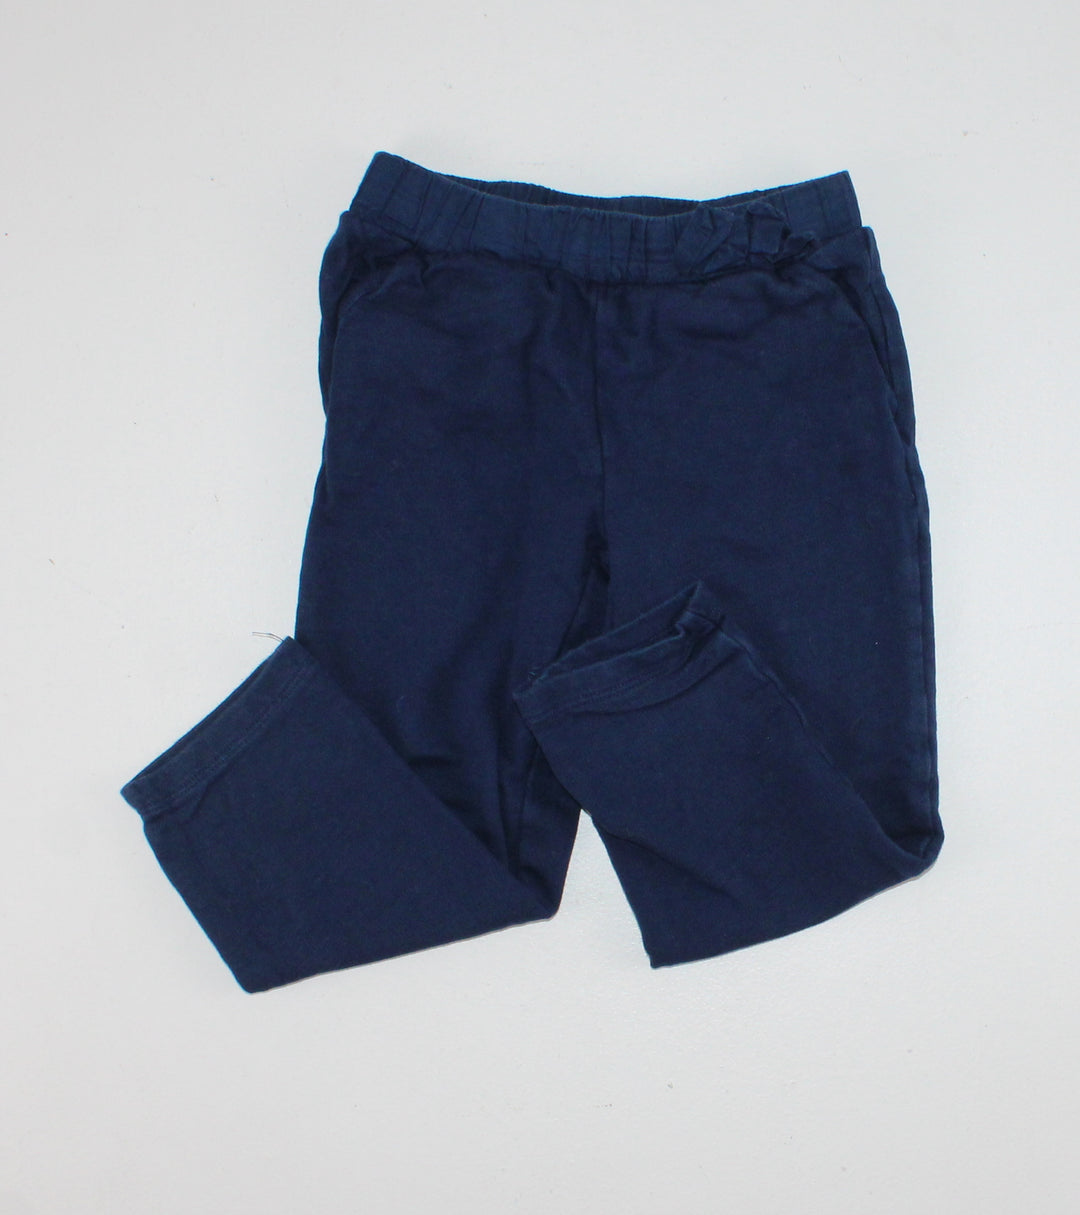 CARTERS NAVY TRACK PANTS WITH BOW 3Y EUC